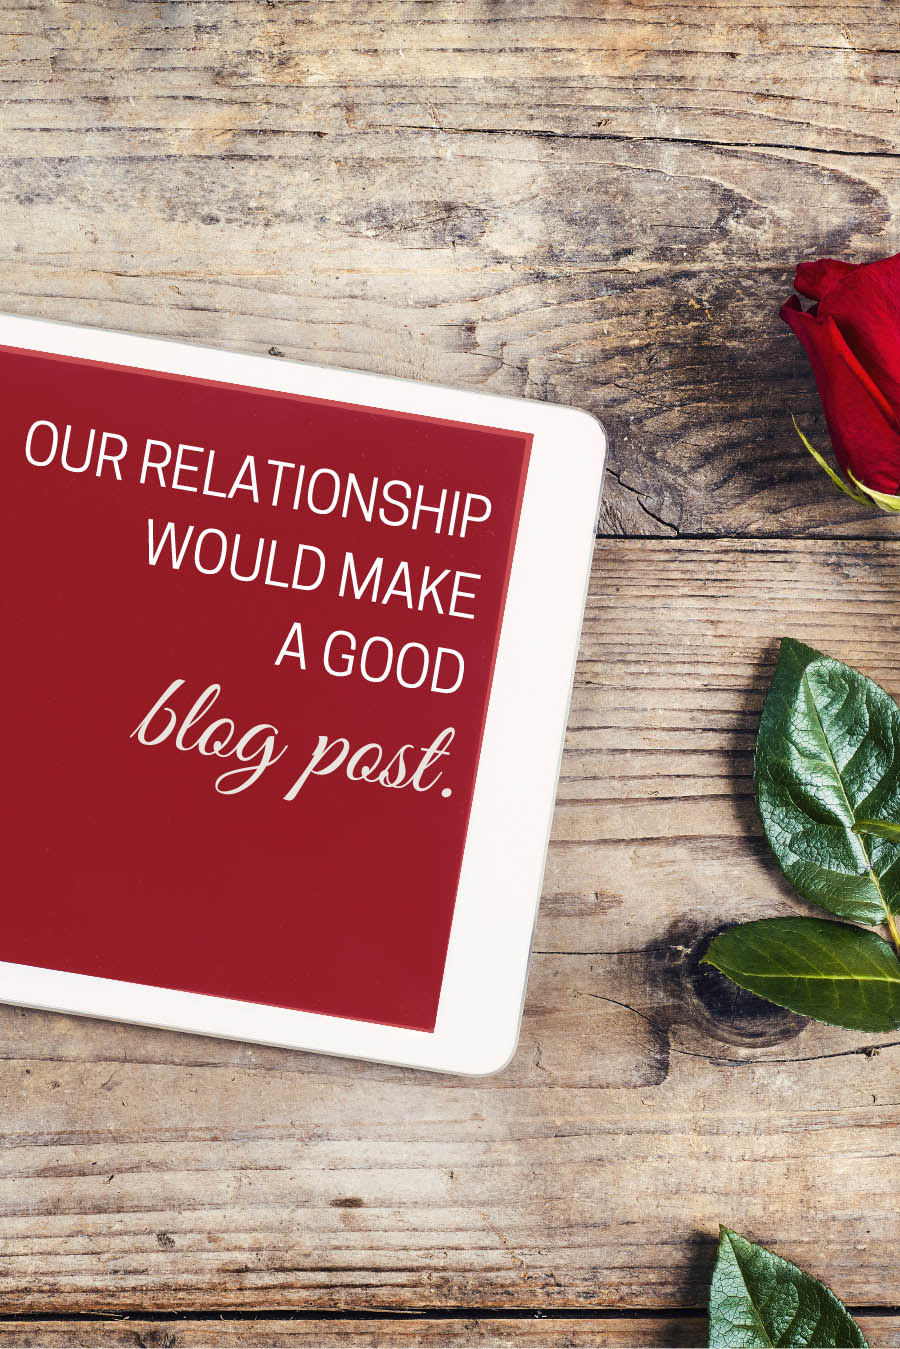 Our relationship would make a good blog post. | Valentines for Travel Bloggers